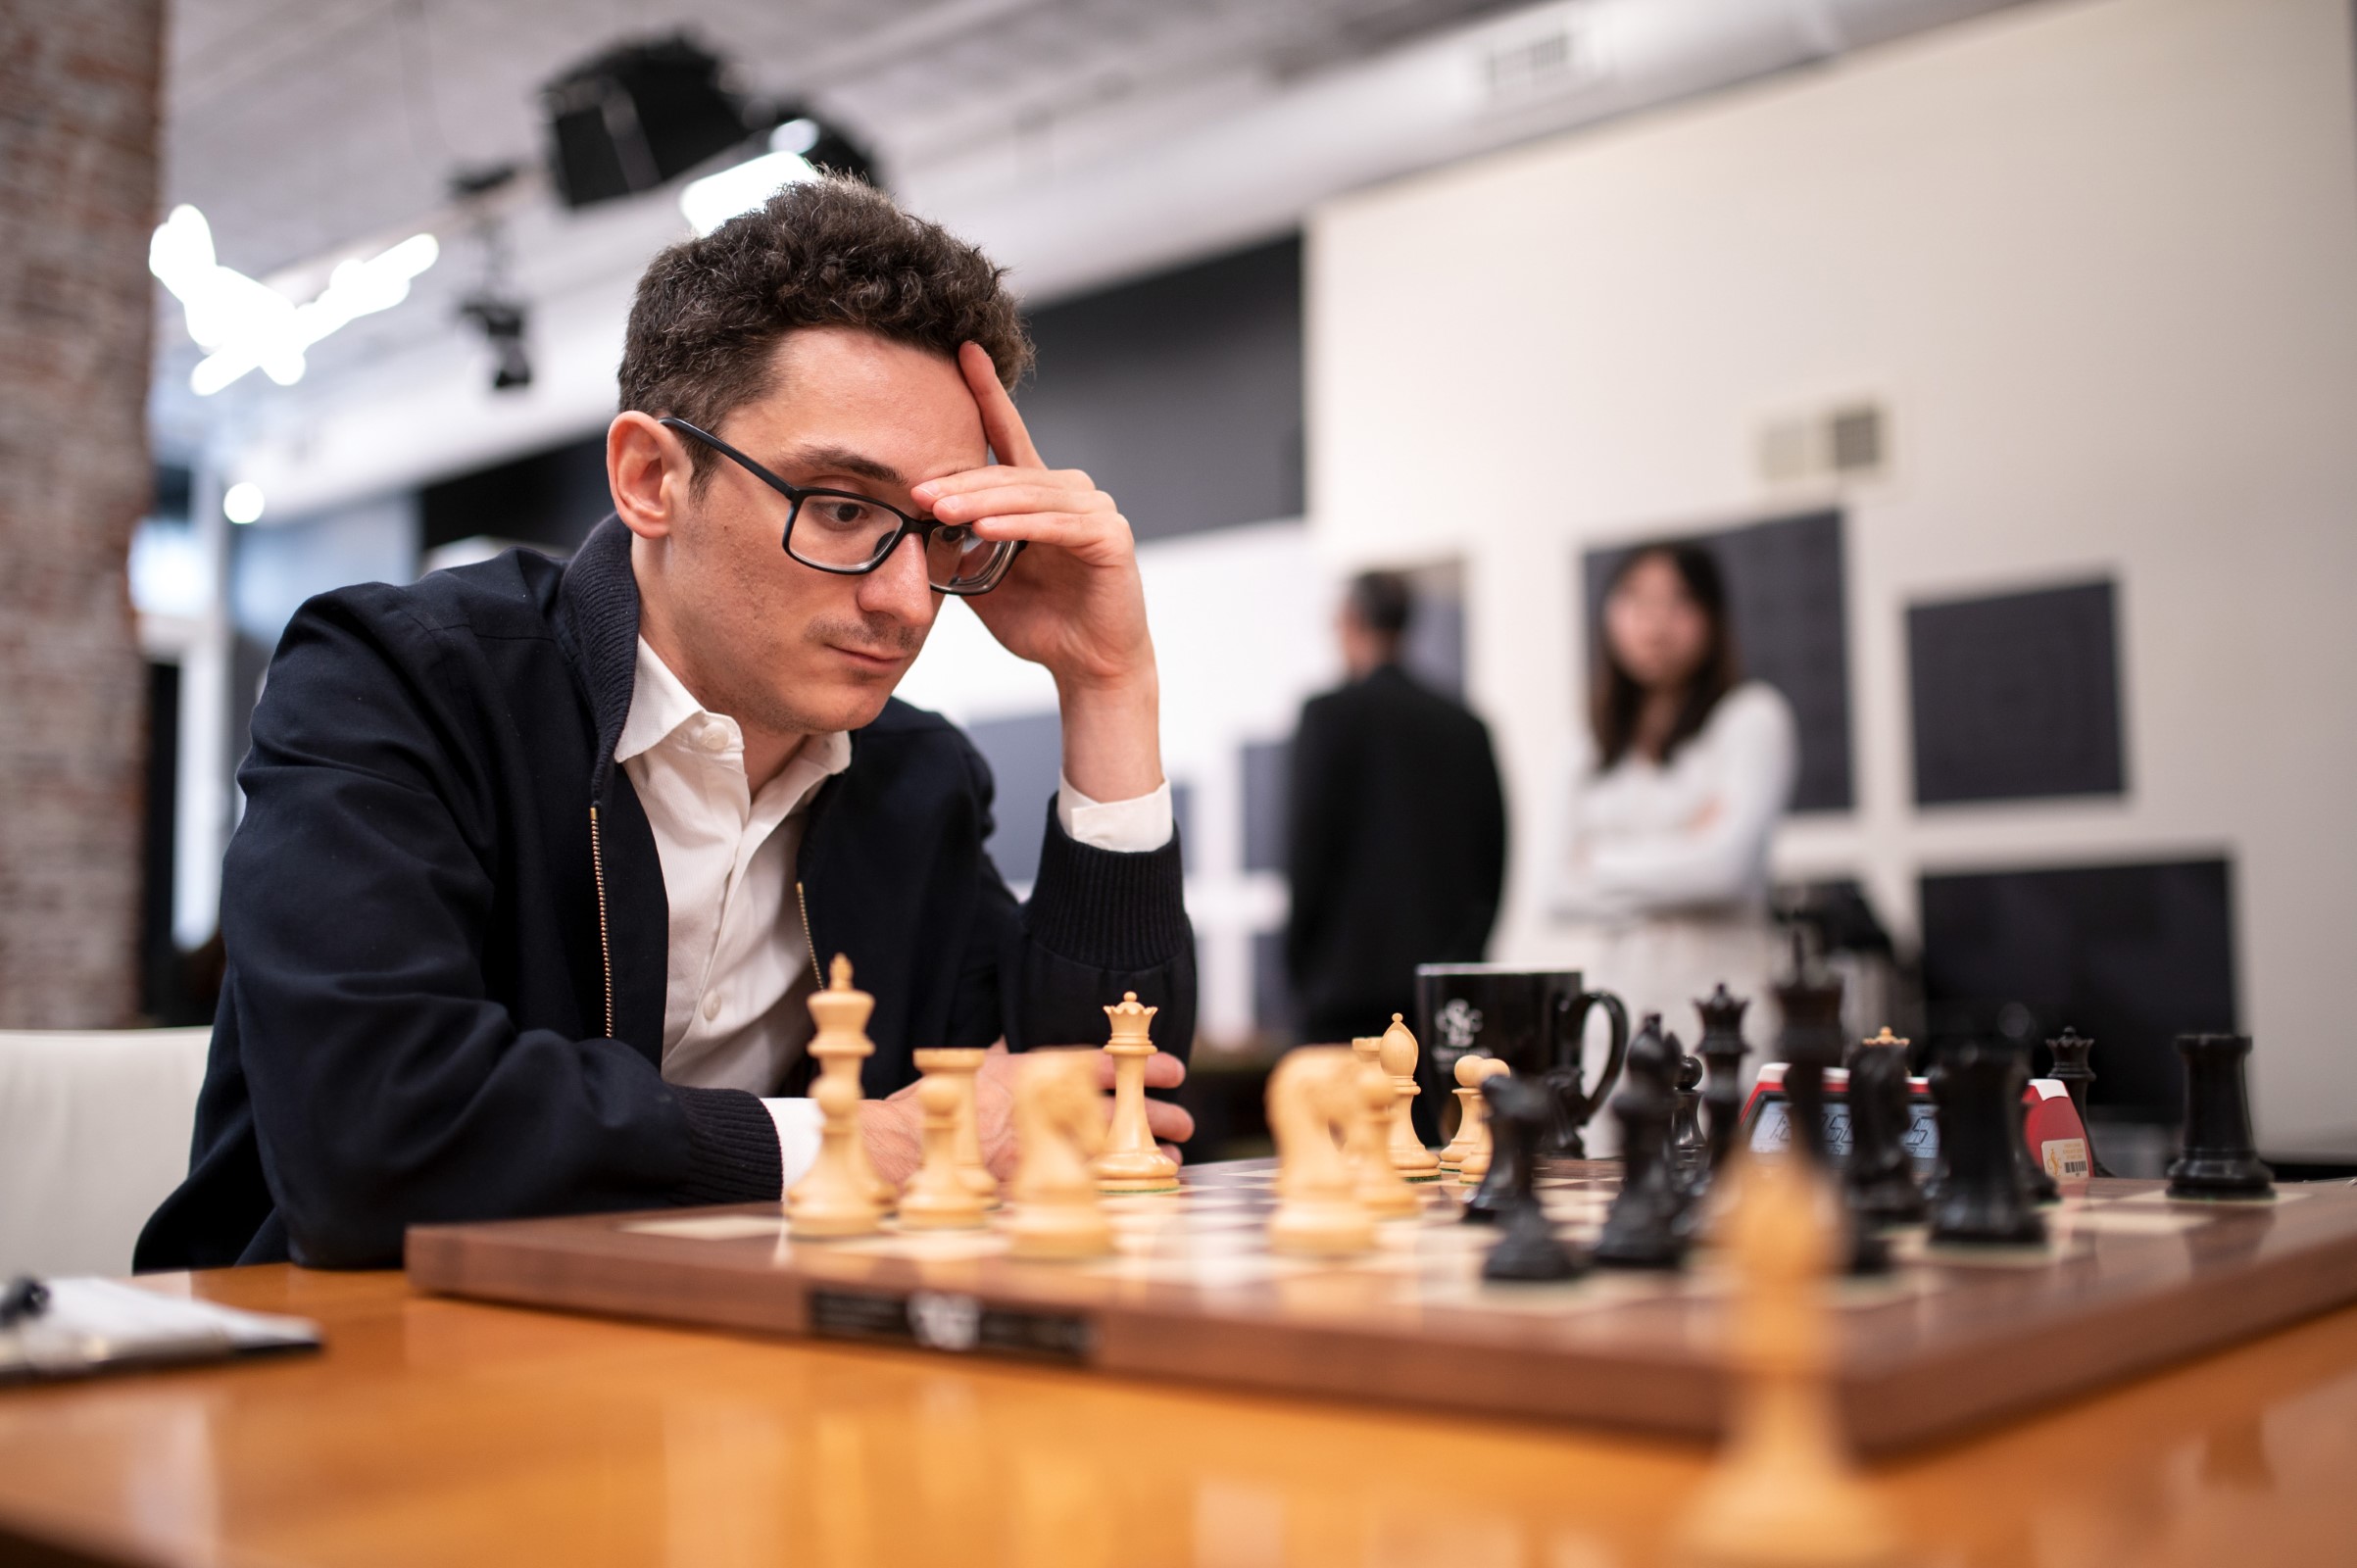 Fabiano Caruana will be the first board in the USA selection